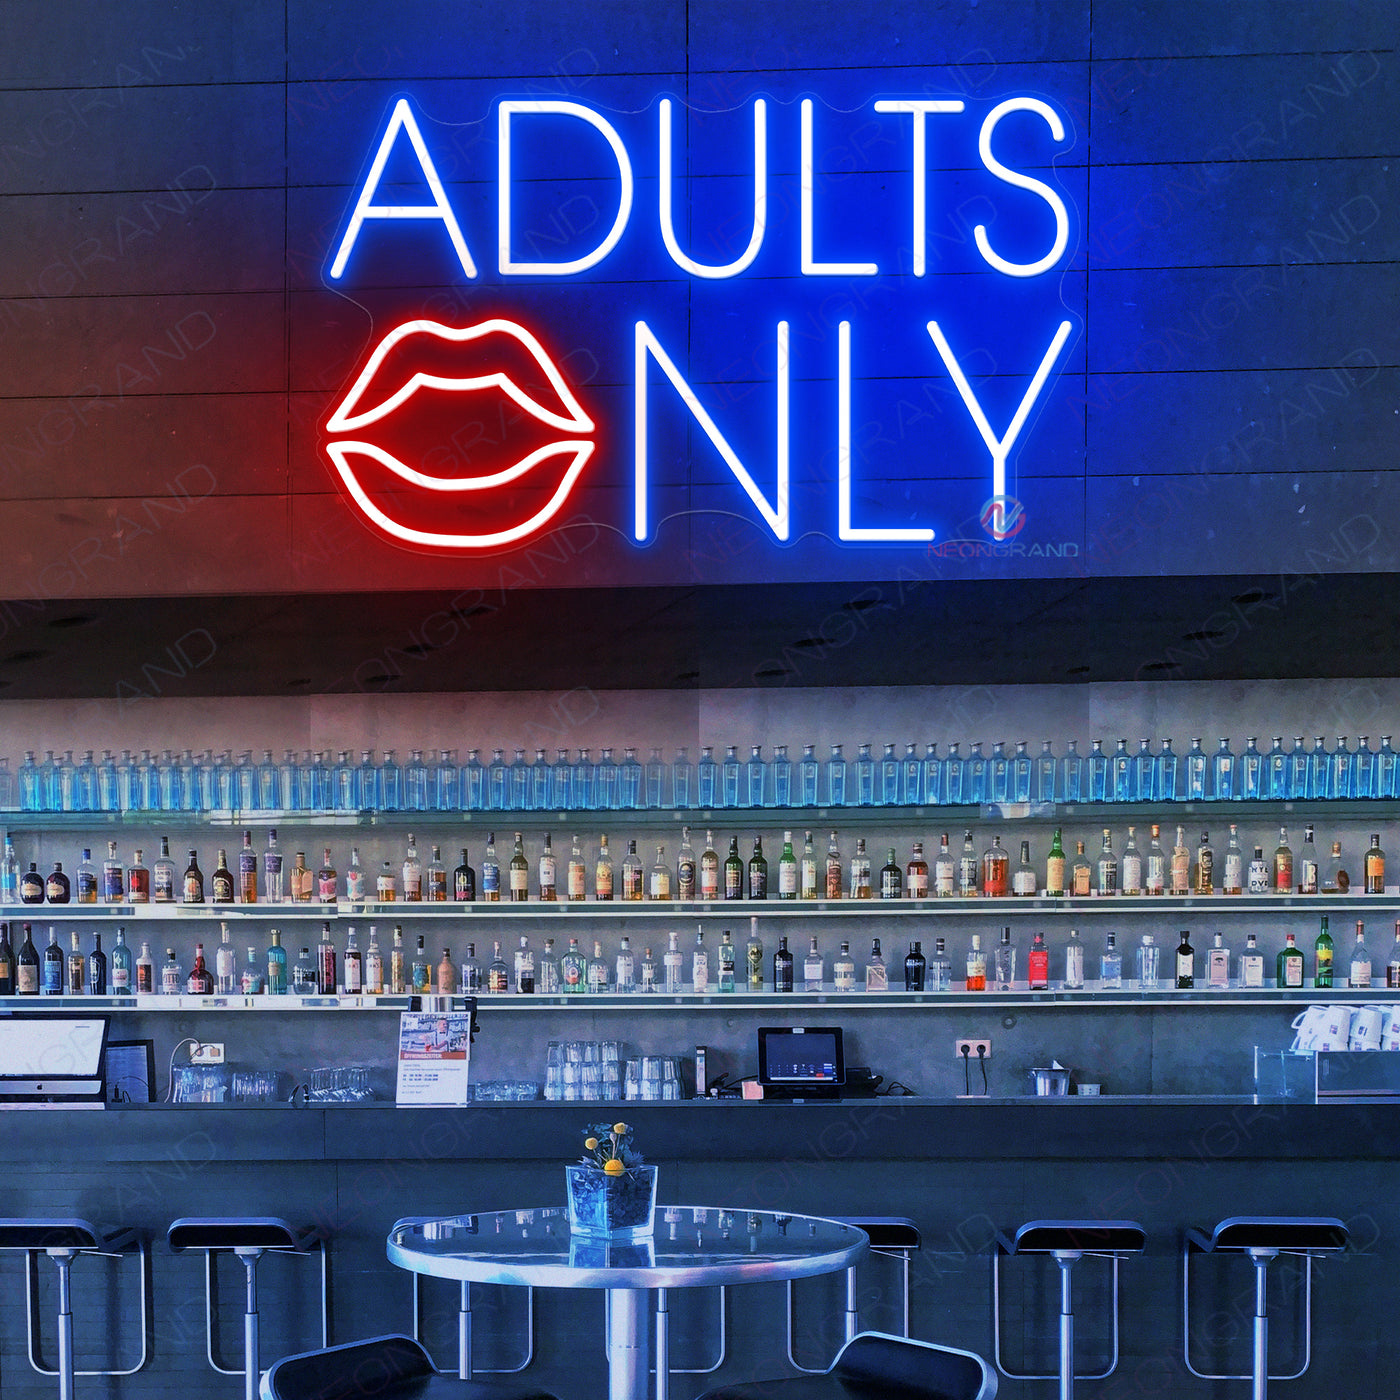 Adults Only Neon Sign Bar Led Light blue